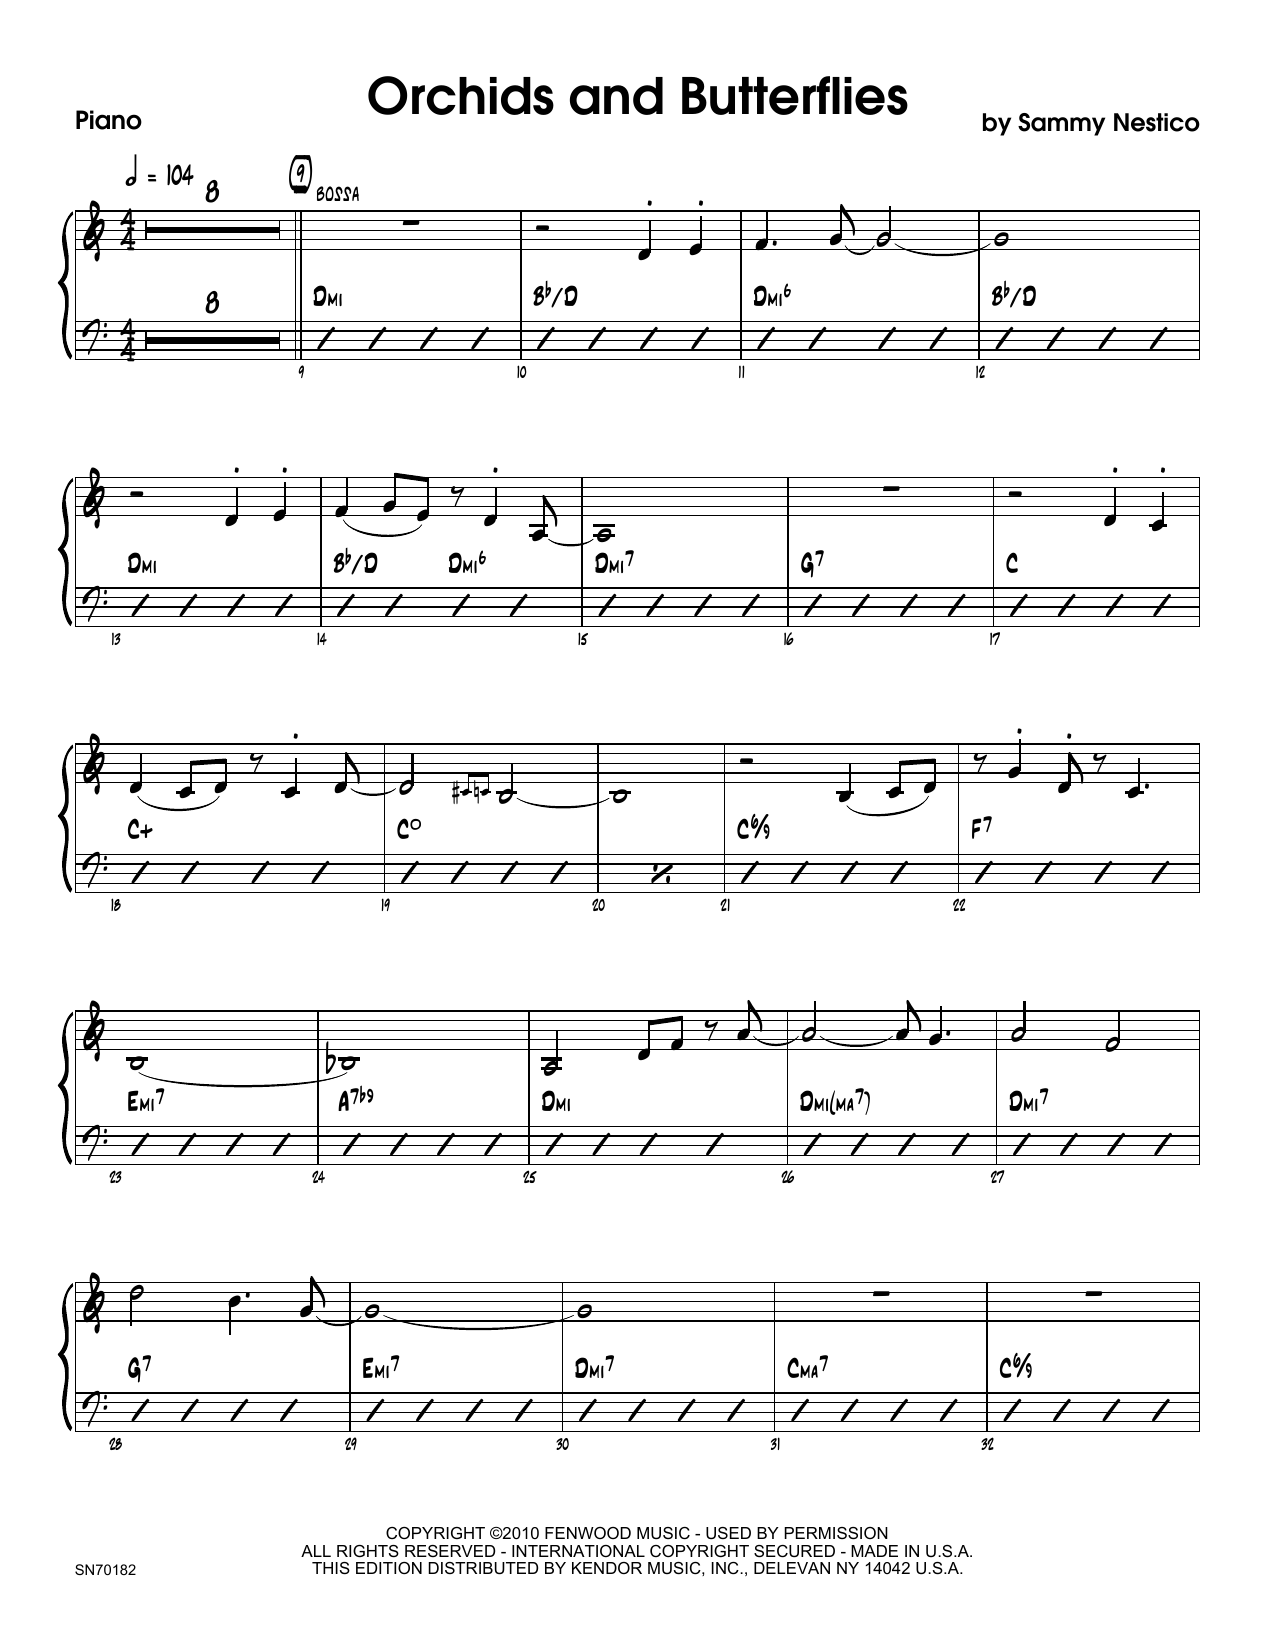 Download Sammy Nestico Orchids And Butterflies - Piano Sheet Music